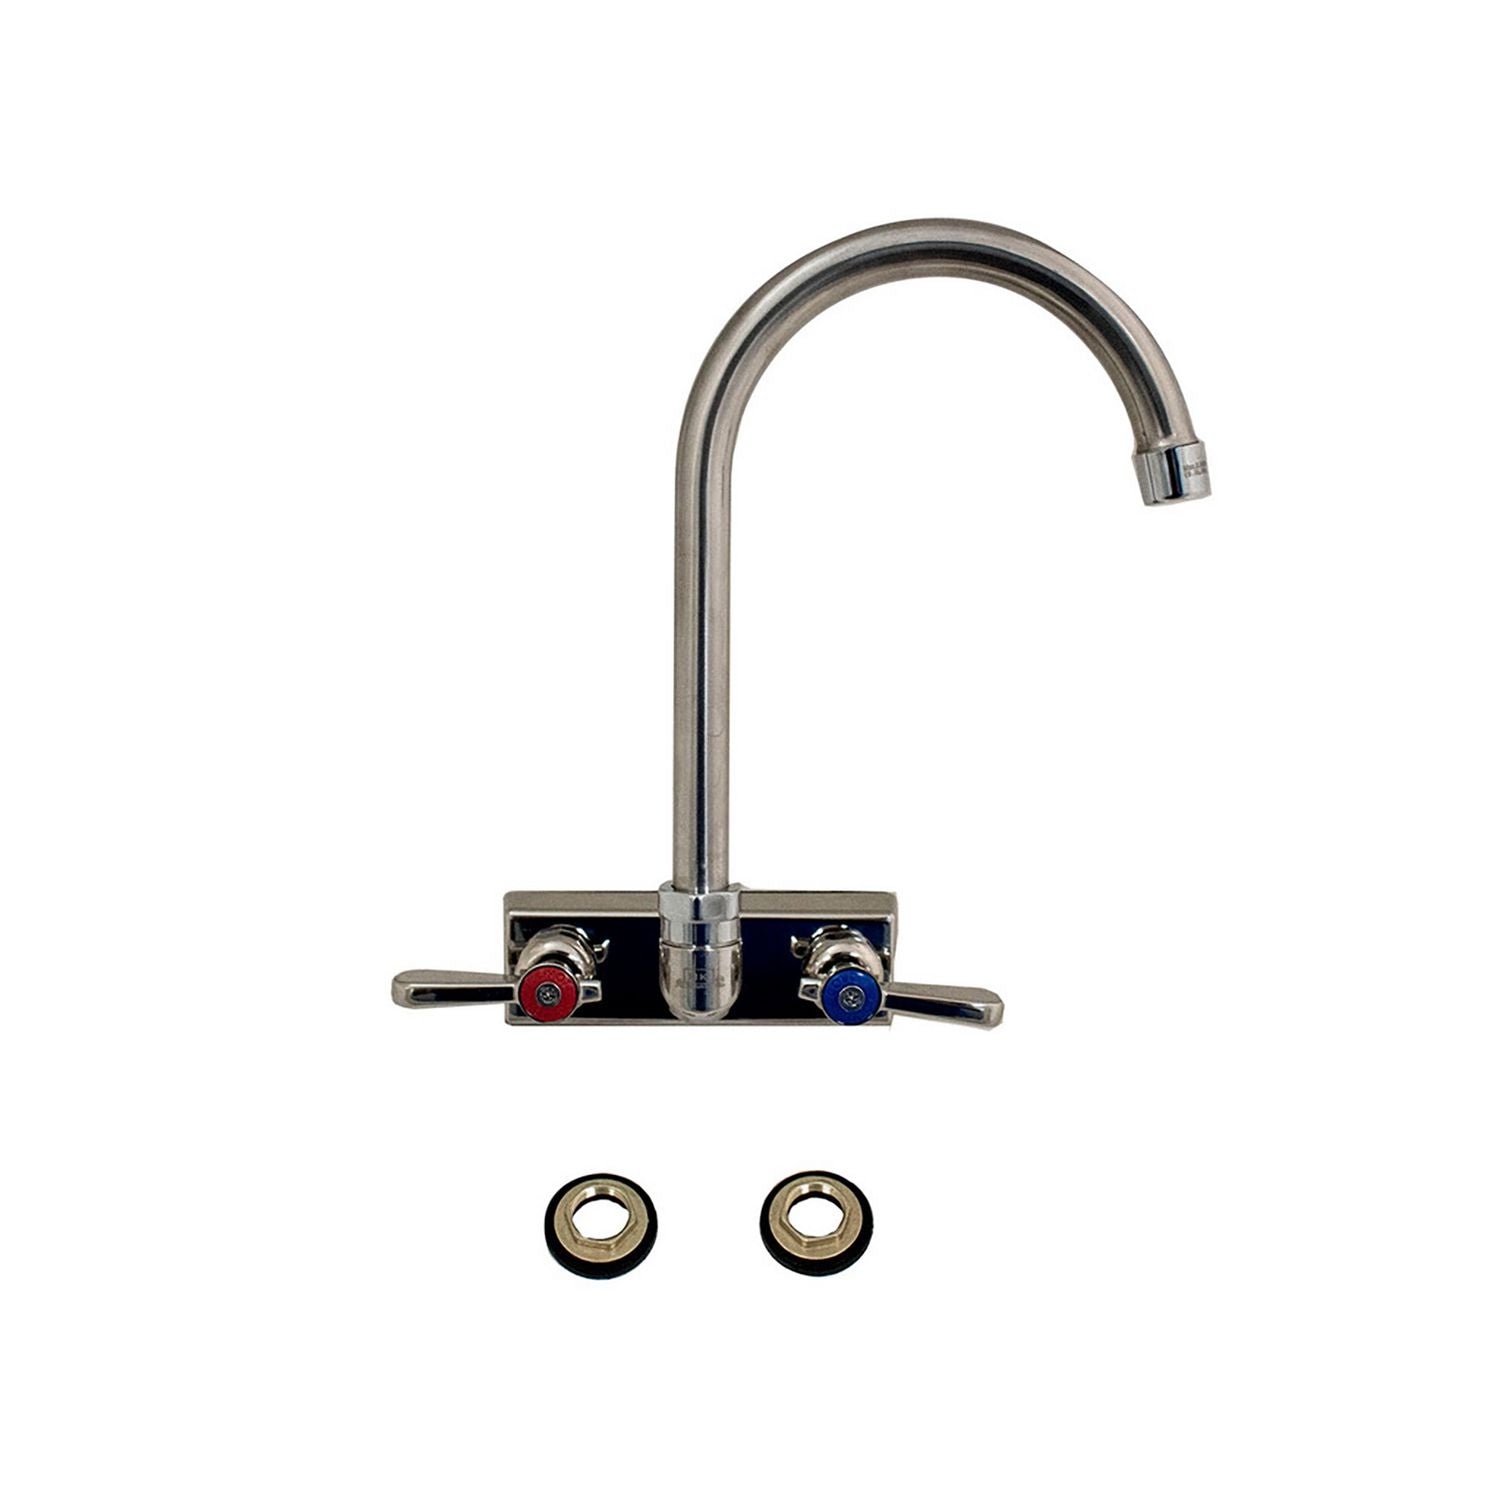 evolution-splash-mount-stainless-steel-faucet-906-height-45-reach-stainless-steel-ships-in-4-6-business-days_bkeevo4sm4g - 1